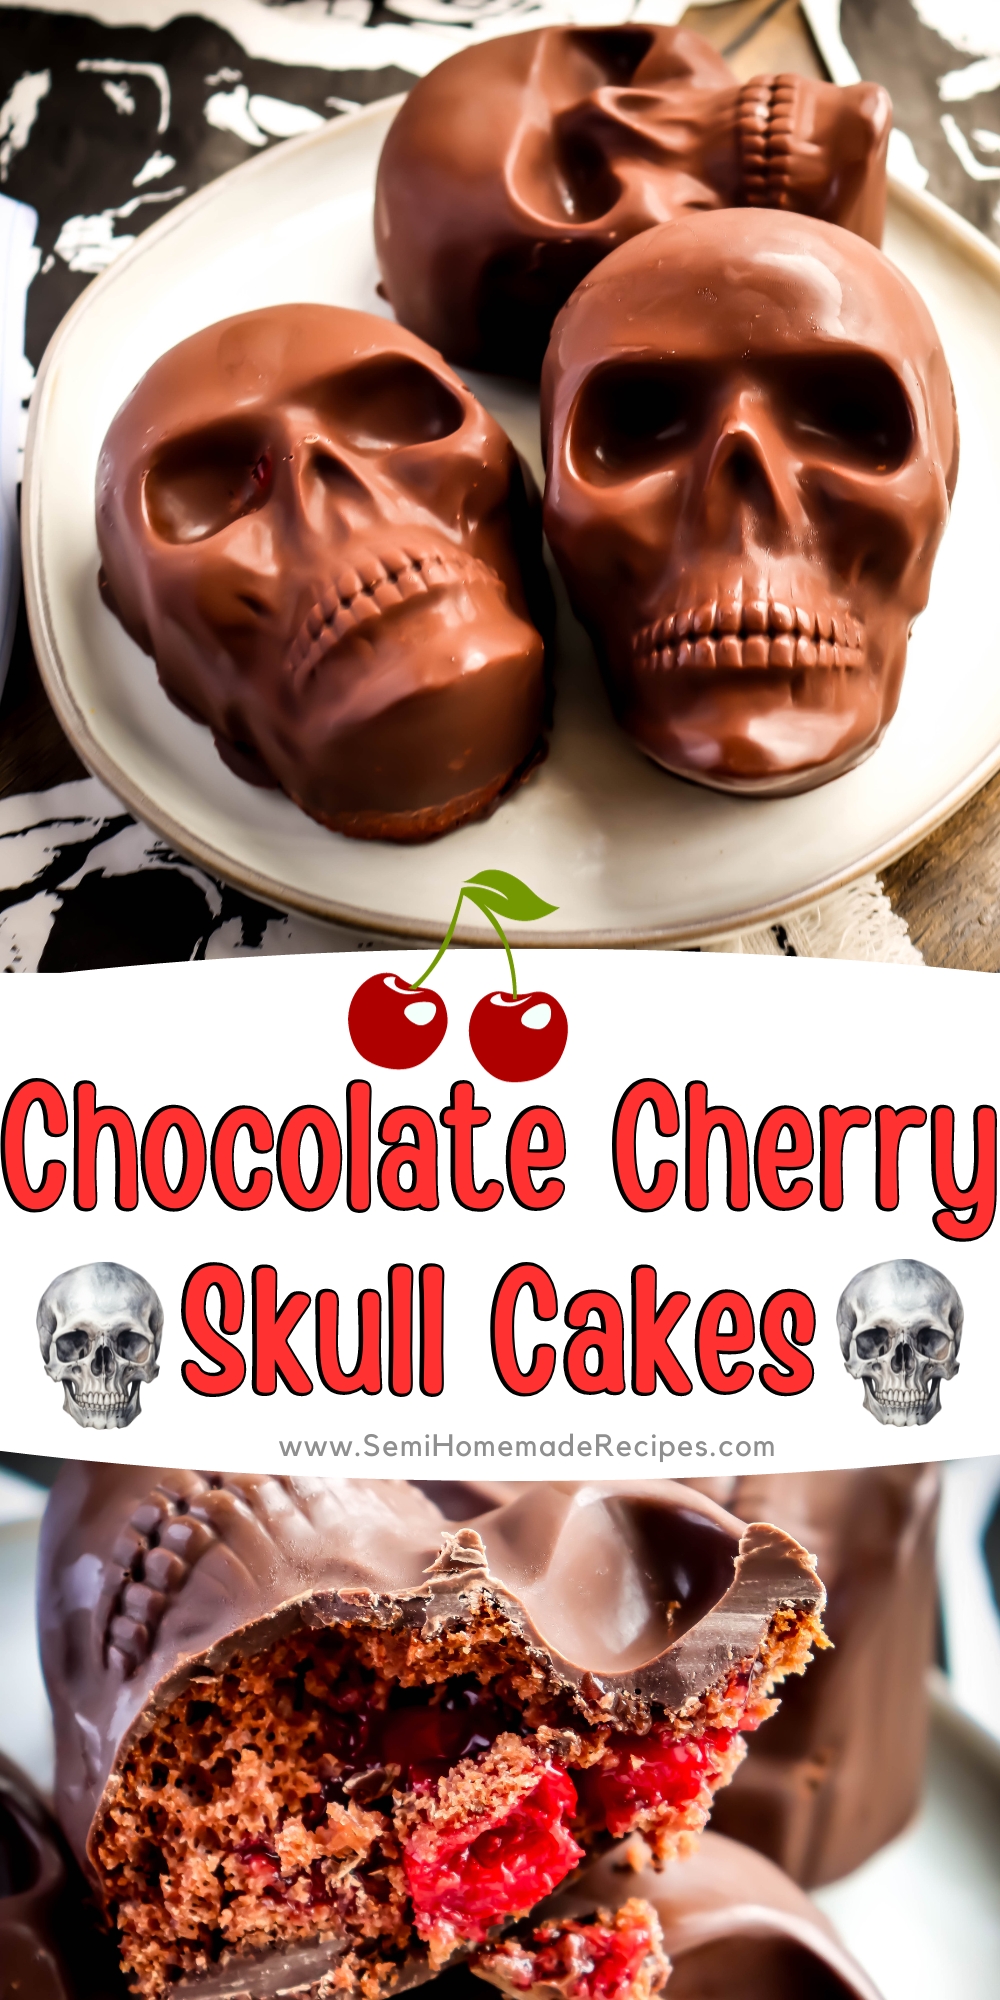 Looking to impress your friends at your next Halloween party? This step-by-step guide for will teach you the tricks to create terrifyingly delicious chocolate cherry skull cakes that will leave your guests in awe.